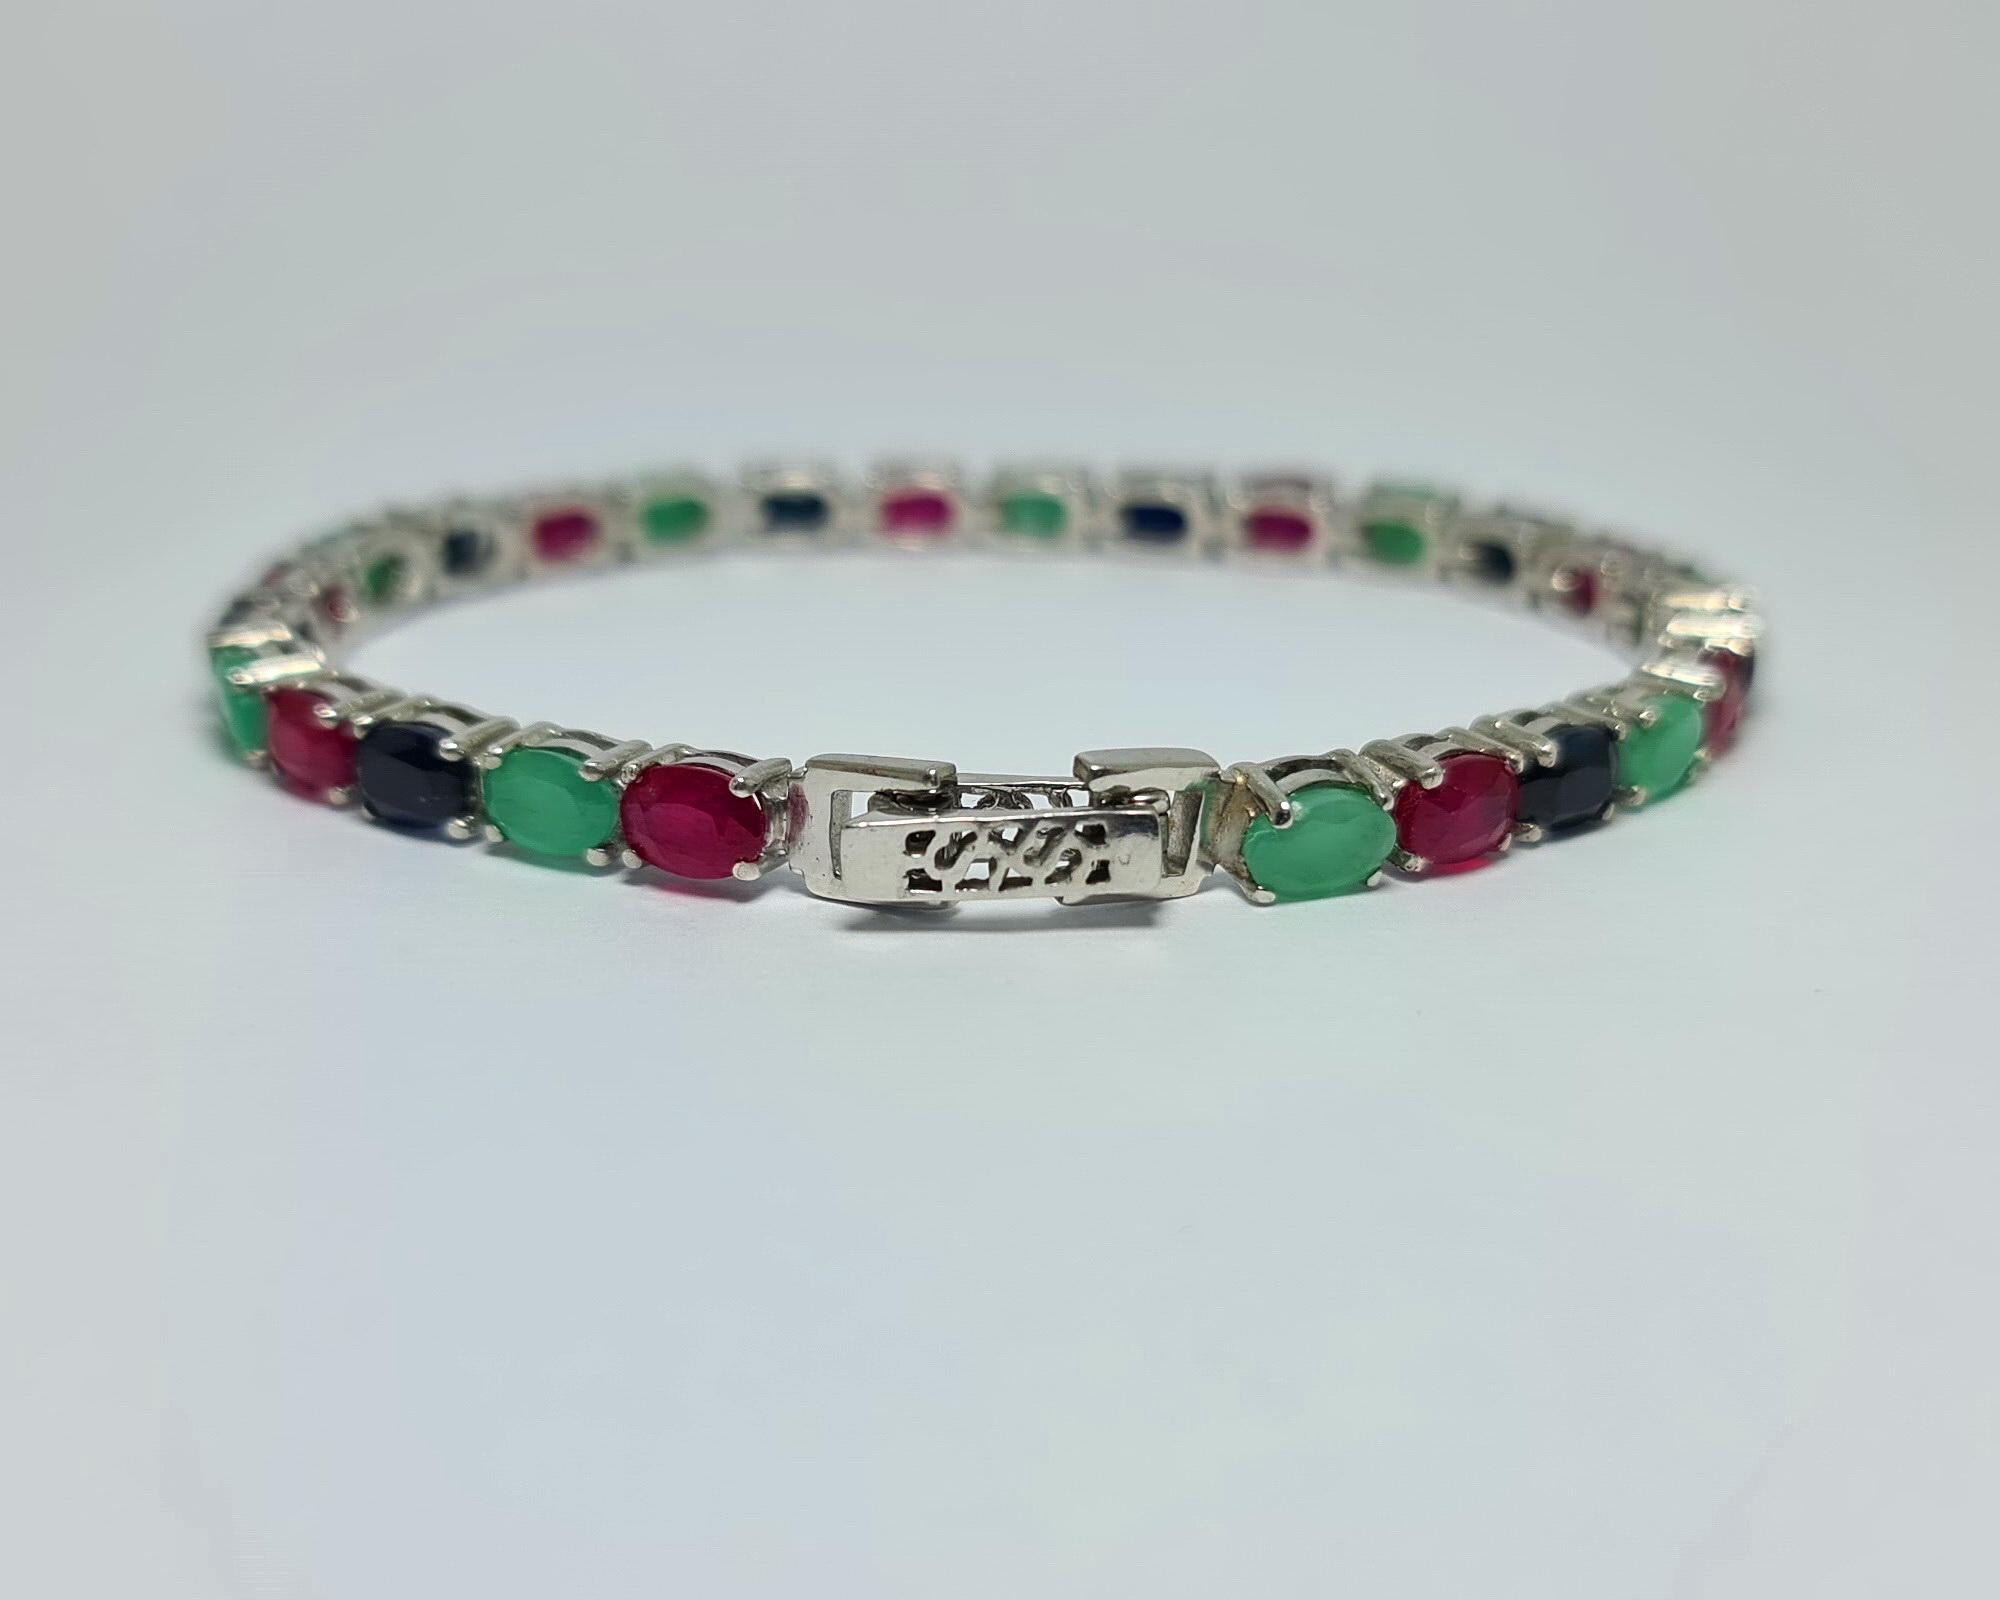 16 Cts Natural Ruby Sapphire and Emerald Tennis Bracelet set in pure.925 Sterling Silver Rhodium Plated Tutti Frutti 